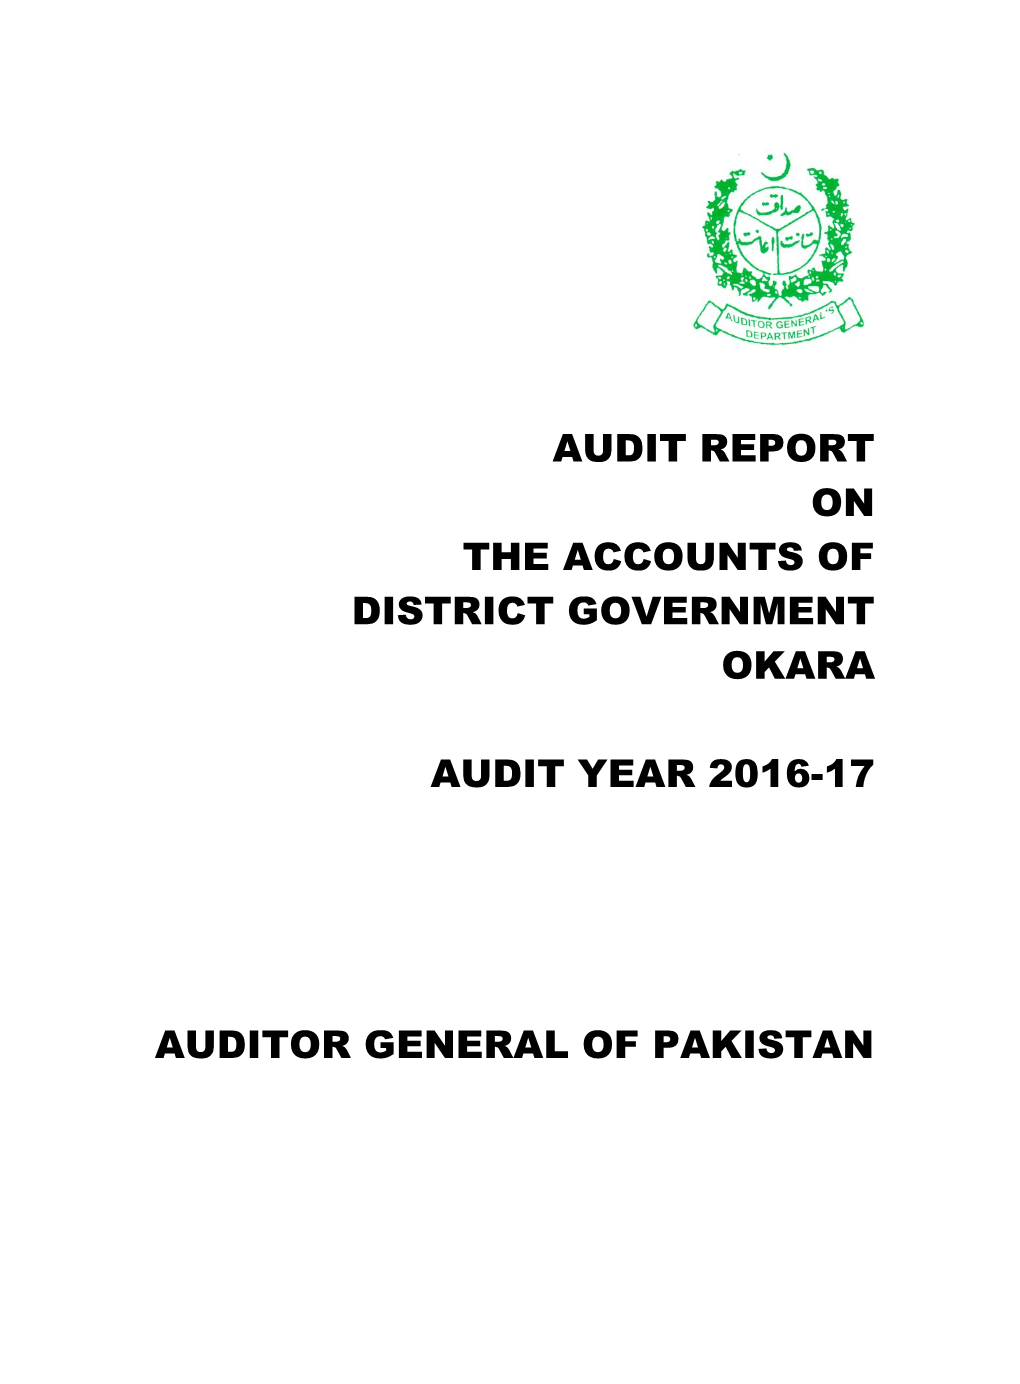 Audit Report on the Accounts of District Government Okara